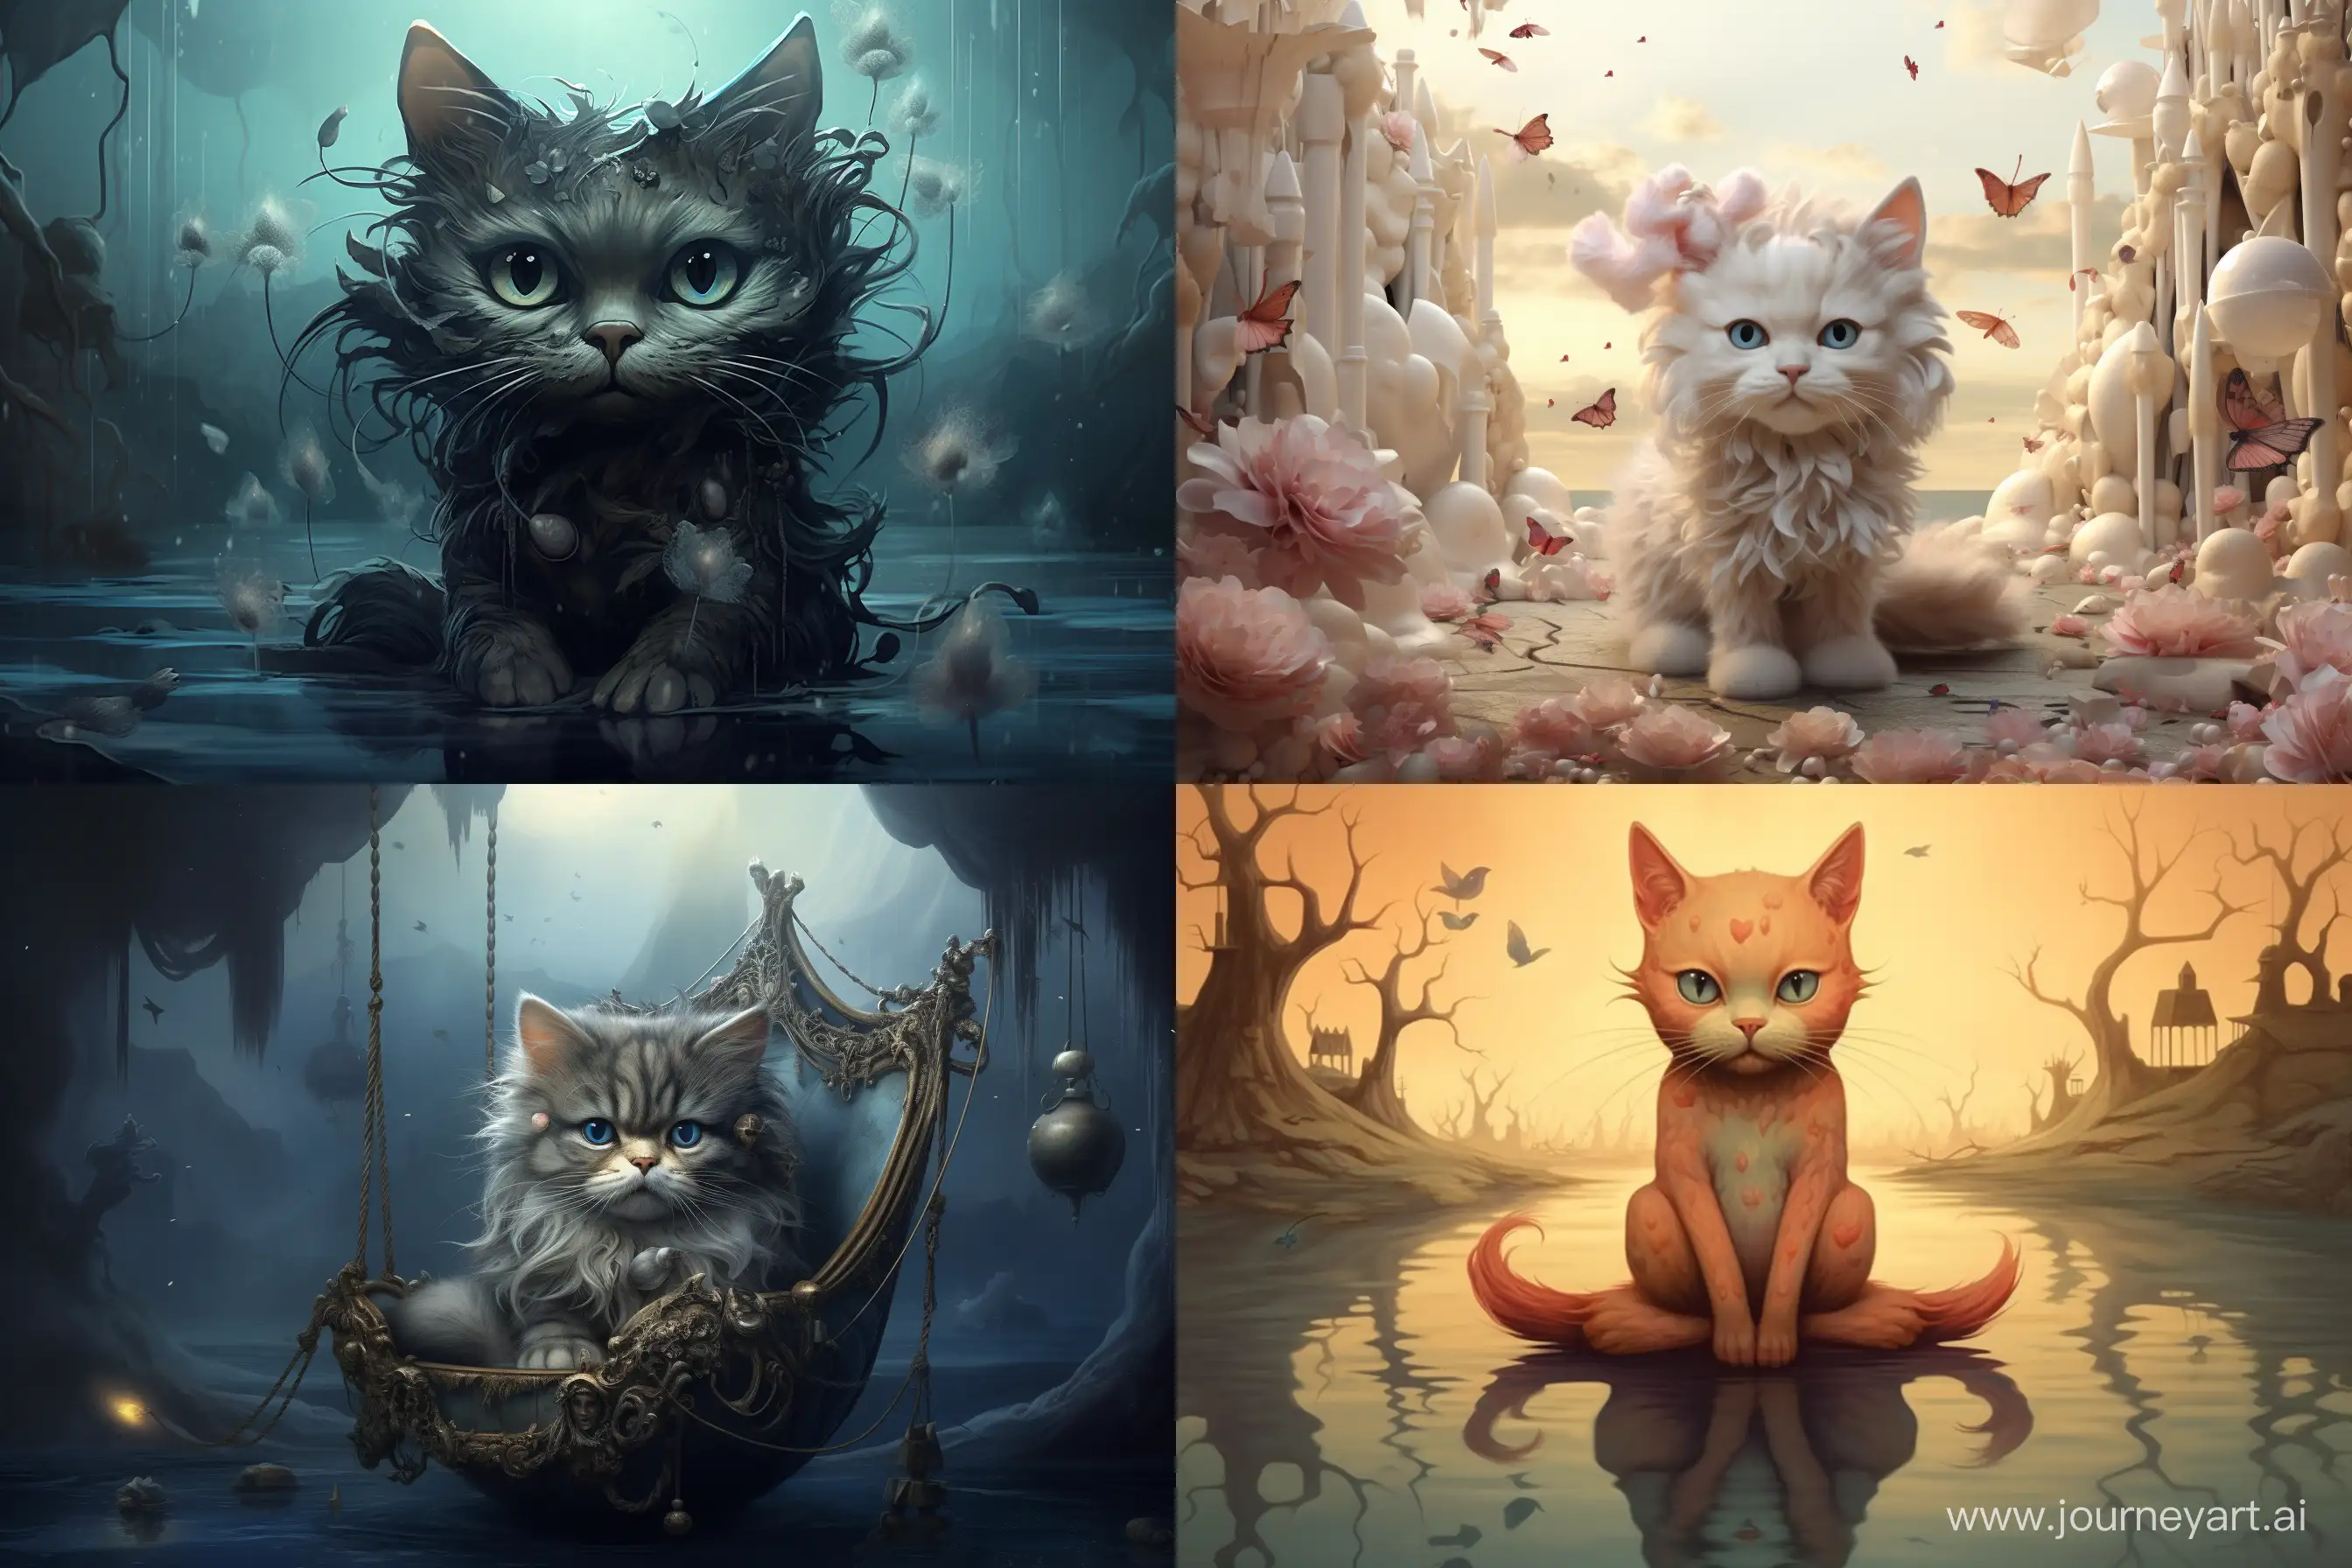 Surrealism: Represents an illustration of a dreamlike and surreal kitten with unexpected elements. --ar 3:2